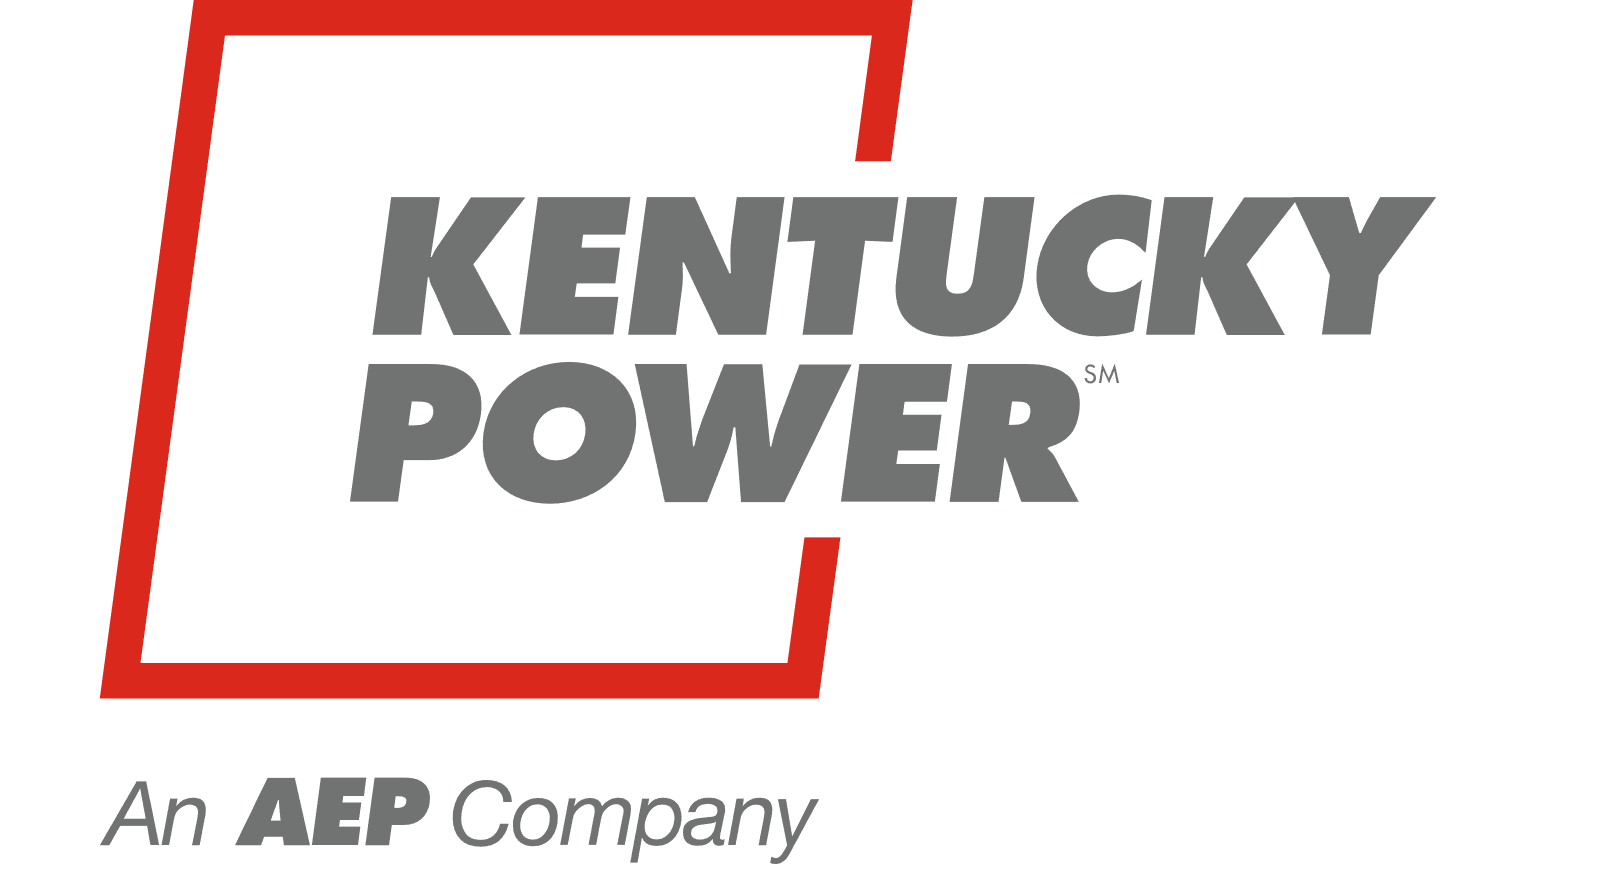 Liberty cancels purchase of Kentucky Power